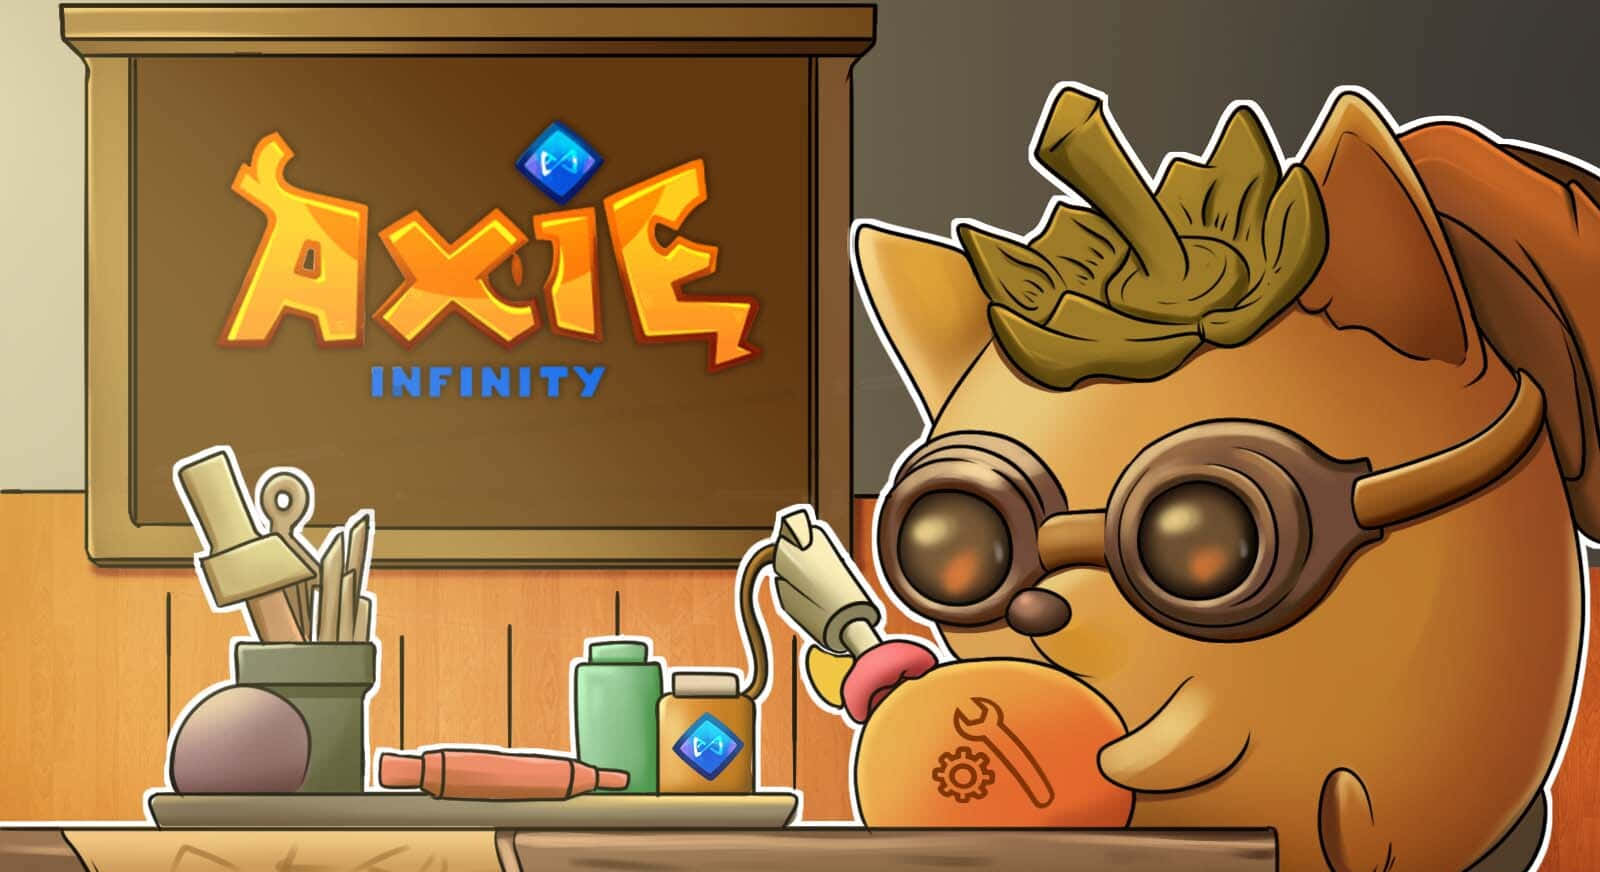 Explore a fantasy world of battling monsters with Axie Infinity!